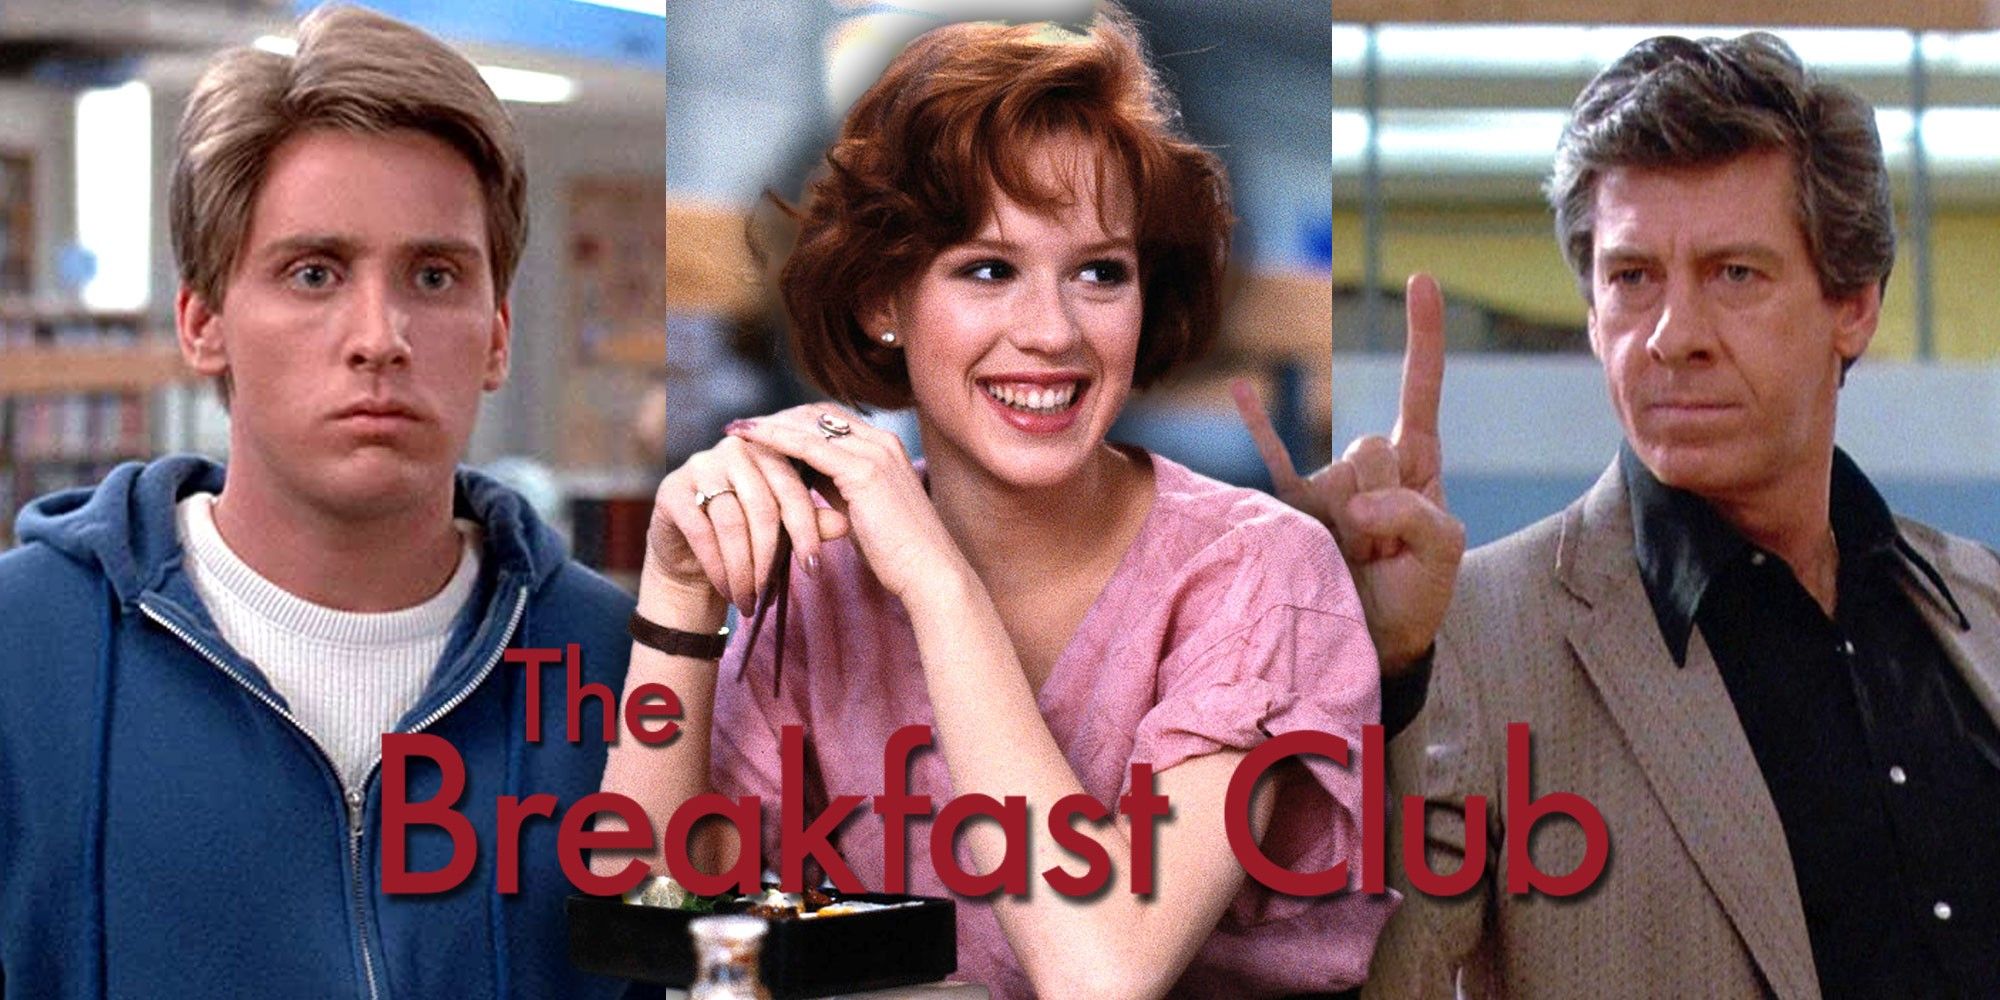 A split image features Andy, Claire, and Vernon in The Breakfast Club